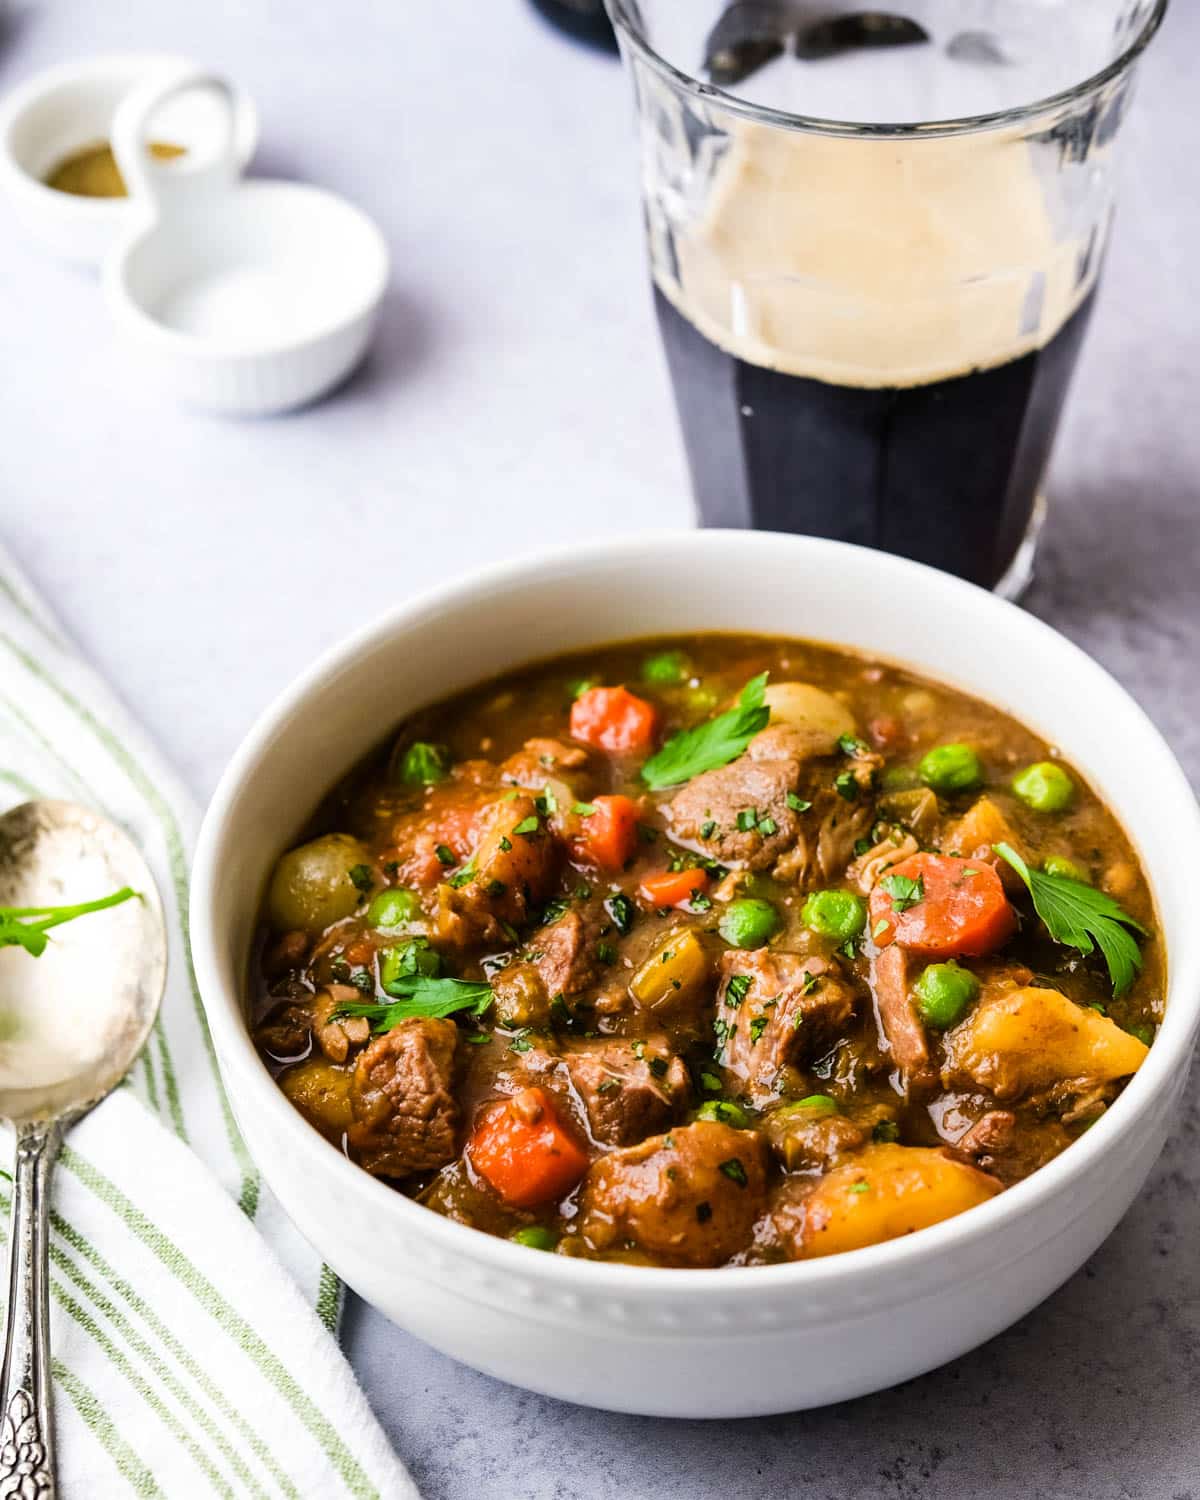 A glass of Guinness with the Irish Stout Lamb Stew.